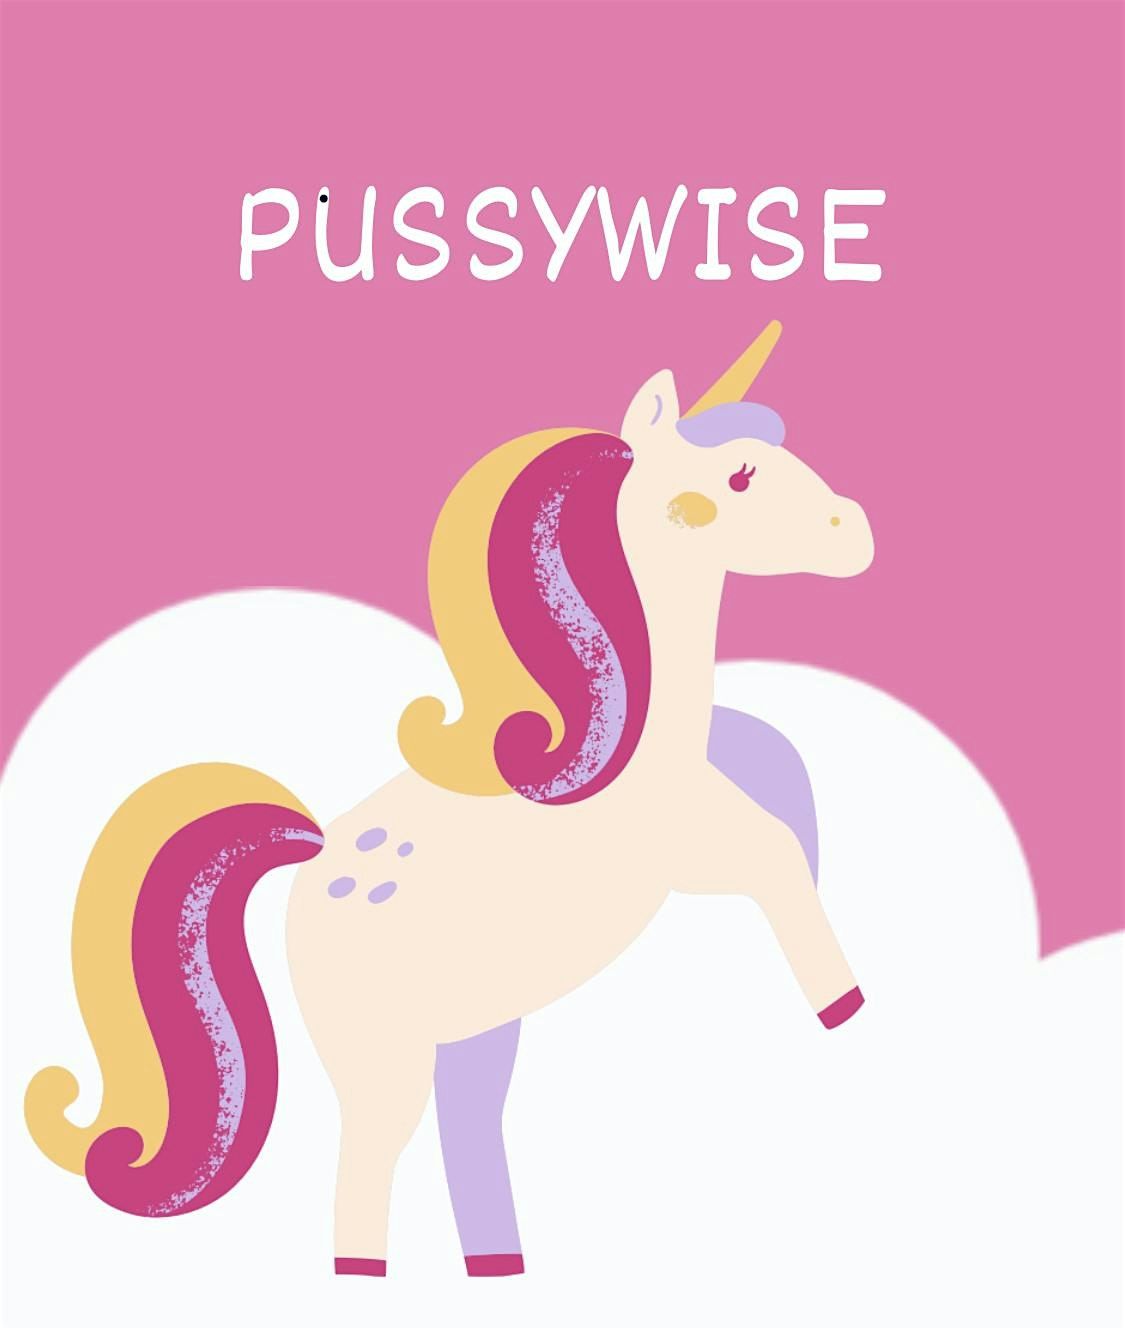 \u201cOn Becoming PussyWise\u201d